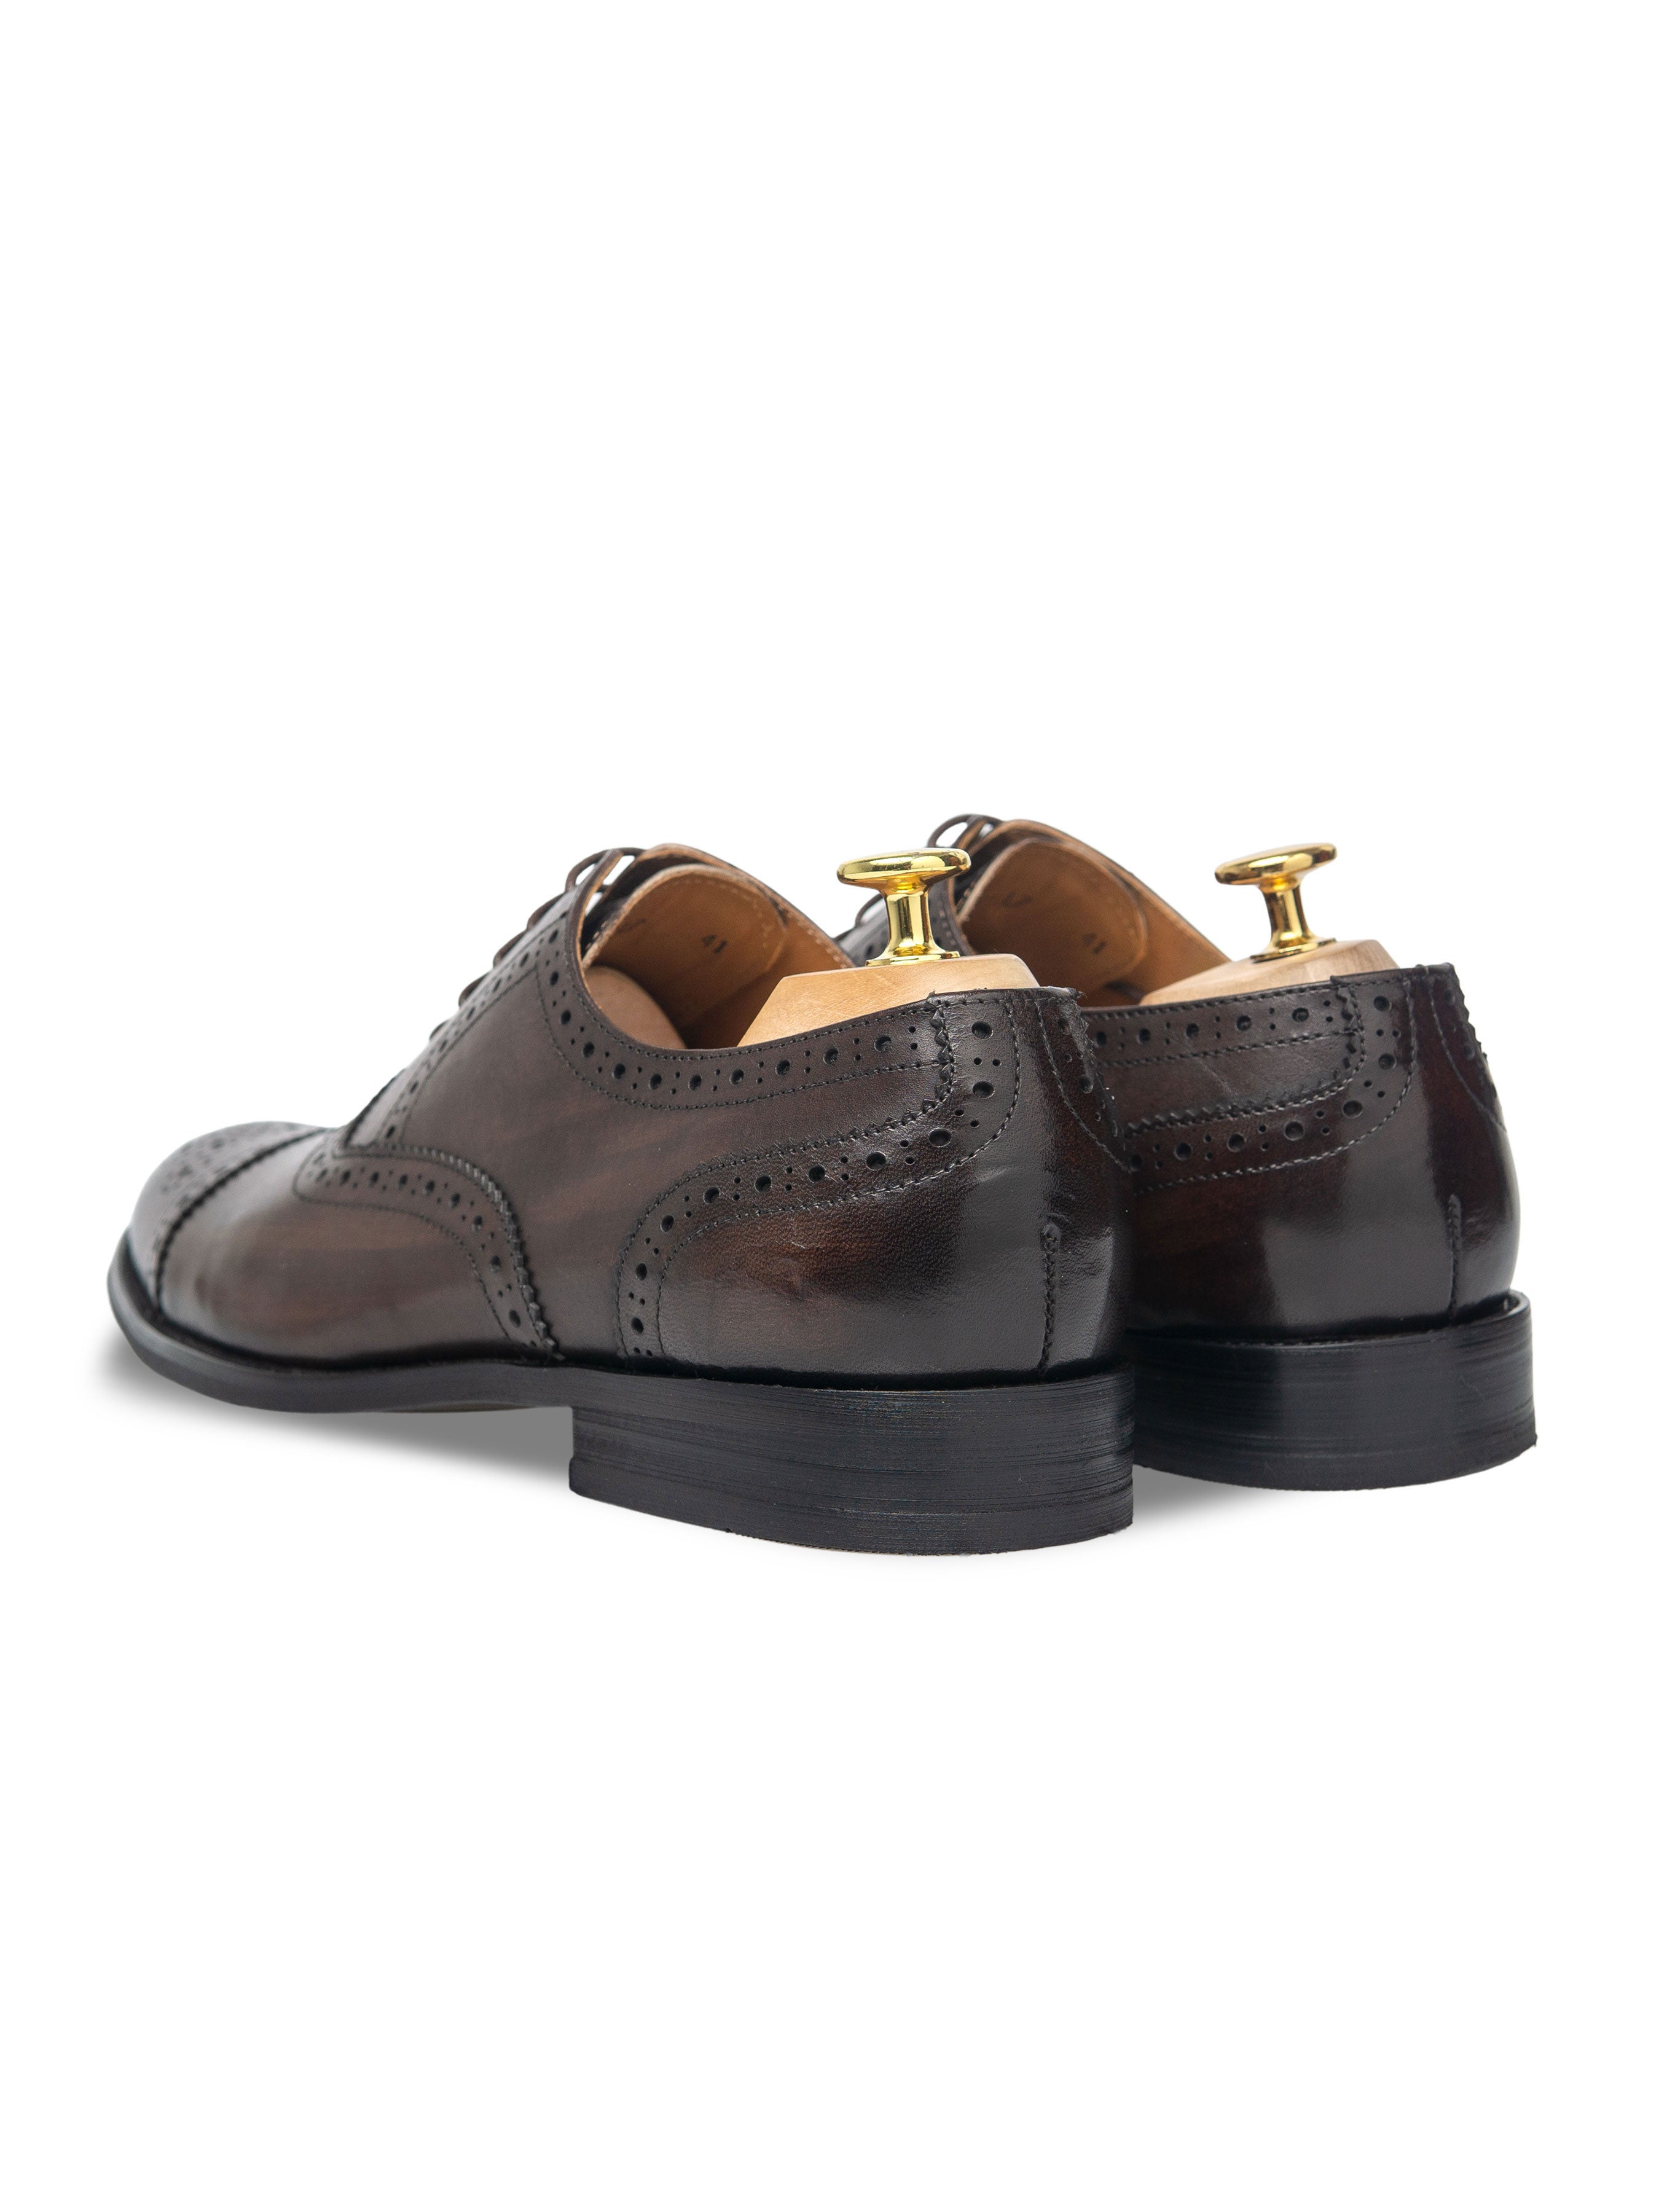 Oxford Cap Toe - Dark Brown Semi Brogue Lace Up (Hand Painted Patina) - Zeve Shoes